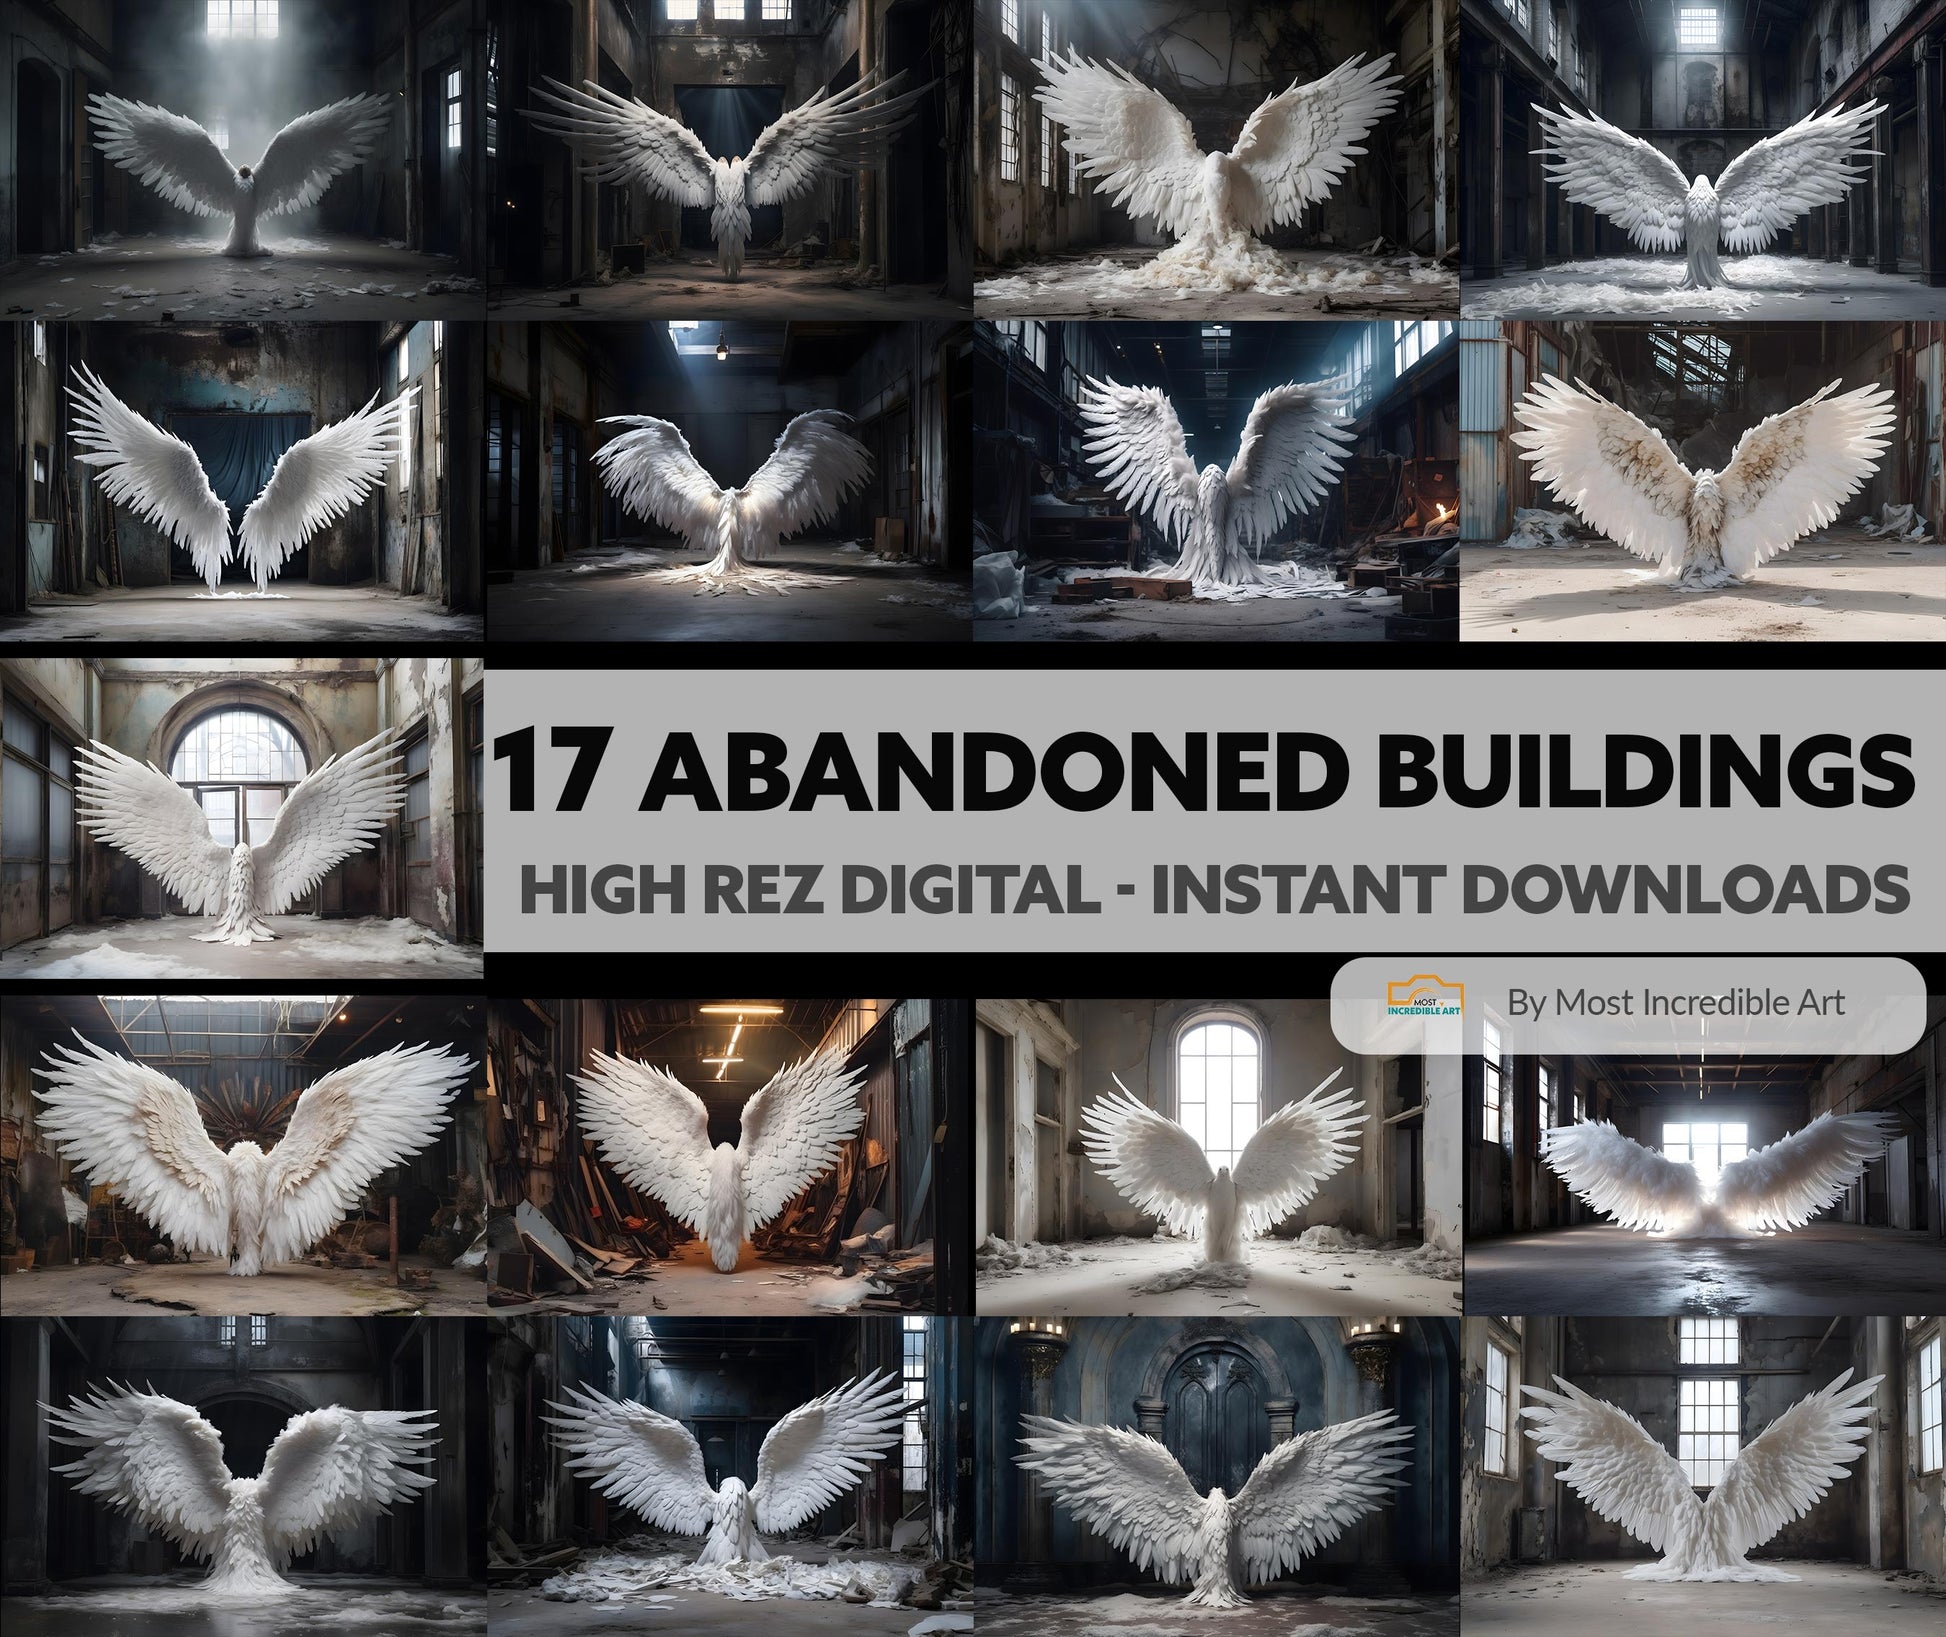 Celestial Wing Overlays - Ethereal Wings on Abandoned Buildings